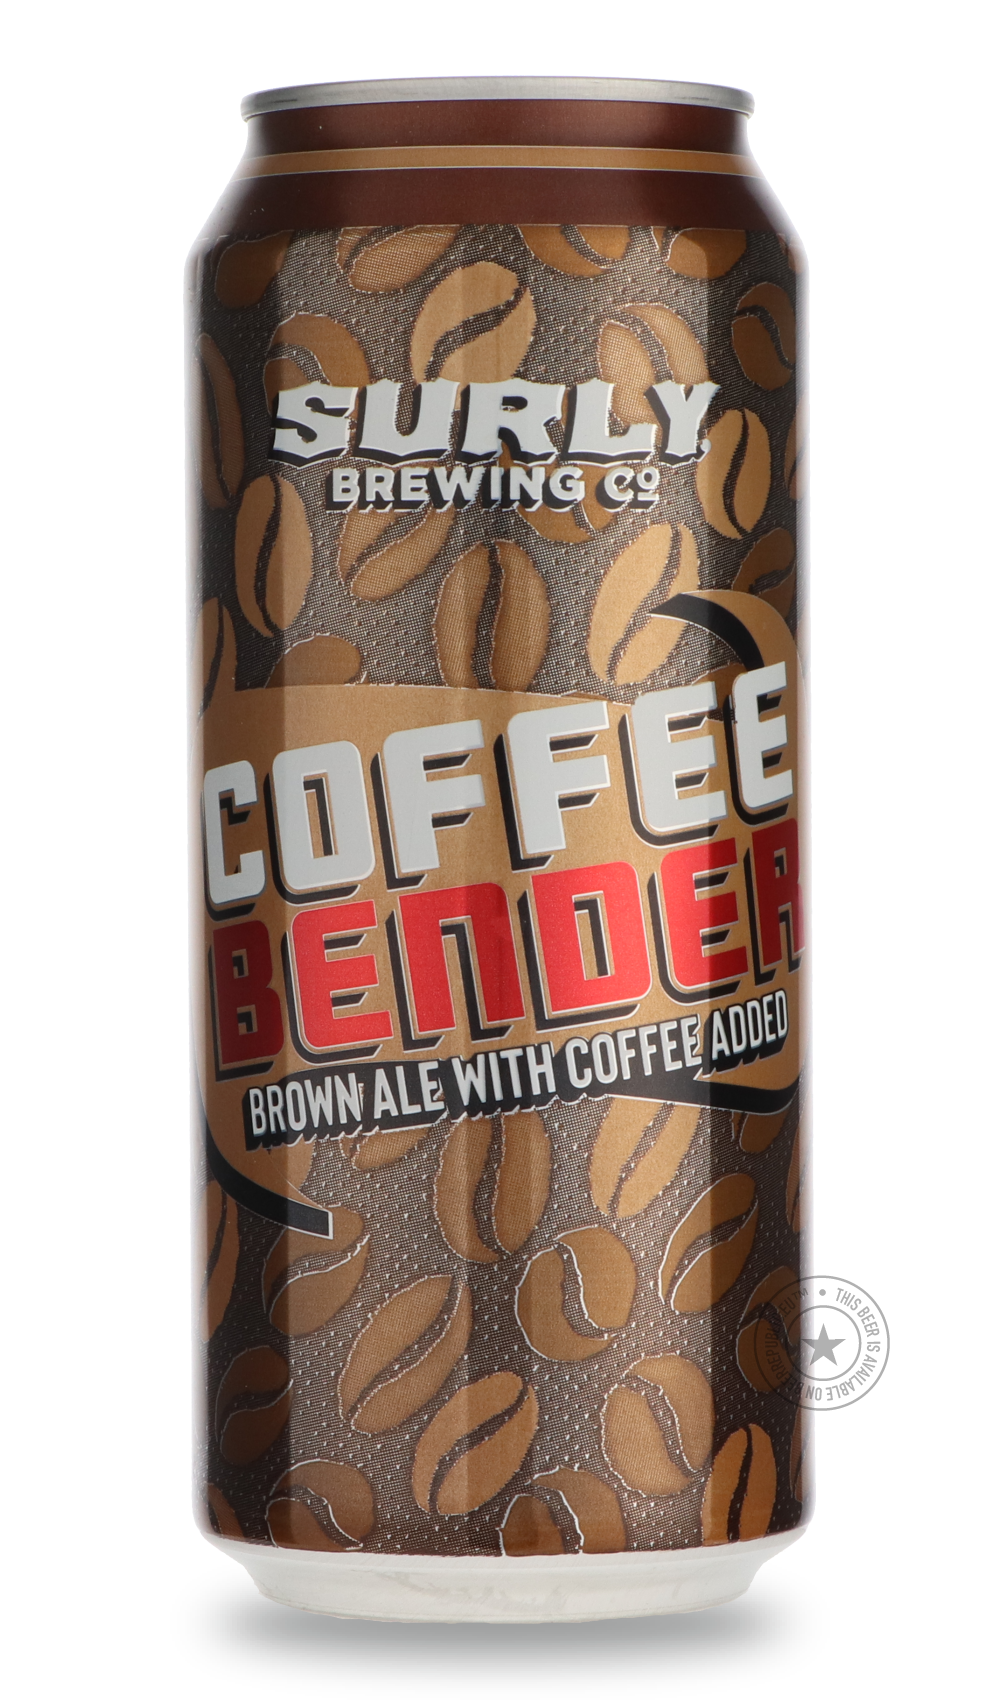 -Surly- Coffee Bender-Brown & Dark- Only @ Beer Republic - The best online beer store for American & Canadian craft beer - Buy beer online from the USA and Canada - Bier online kopen - Amerikaans bier kopen - Craft beer store - Craft beer kopen - Amerikanisch bier kaufen - Bier online kaufen - Acheter biere online - IPA - Stout - Porter - New England IPA - Hazy IPA - Imperial Stout - Barrel Aged - Barrel Aged Imperial Stout - Brown - Dark beer - Blond - Blonde - Pilsner - Lager - Wheat - Weizen - Amber - Ba